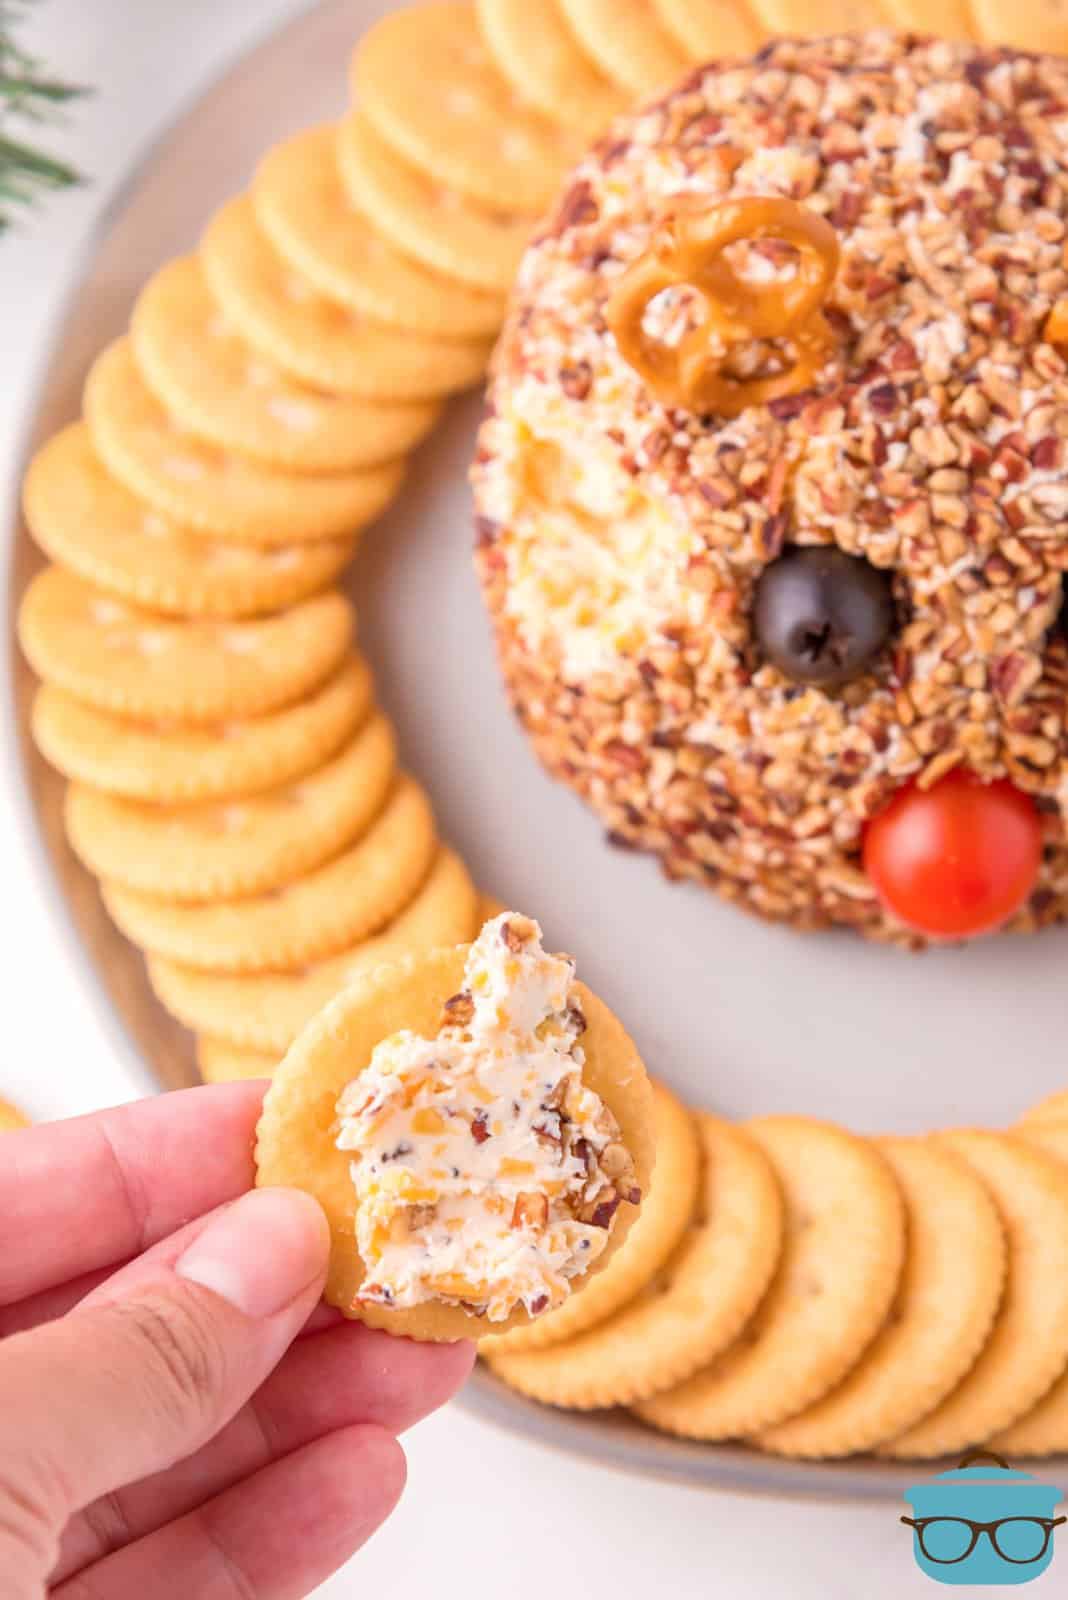 Hand holding up a cracker with some of the Rudolph Cheeseball on it.